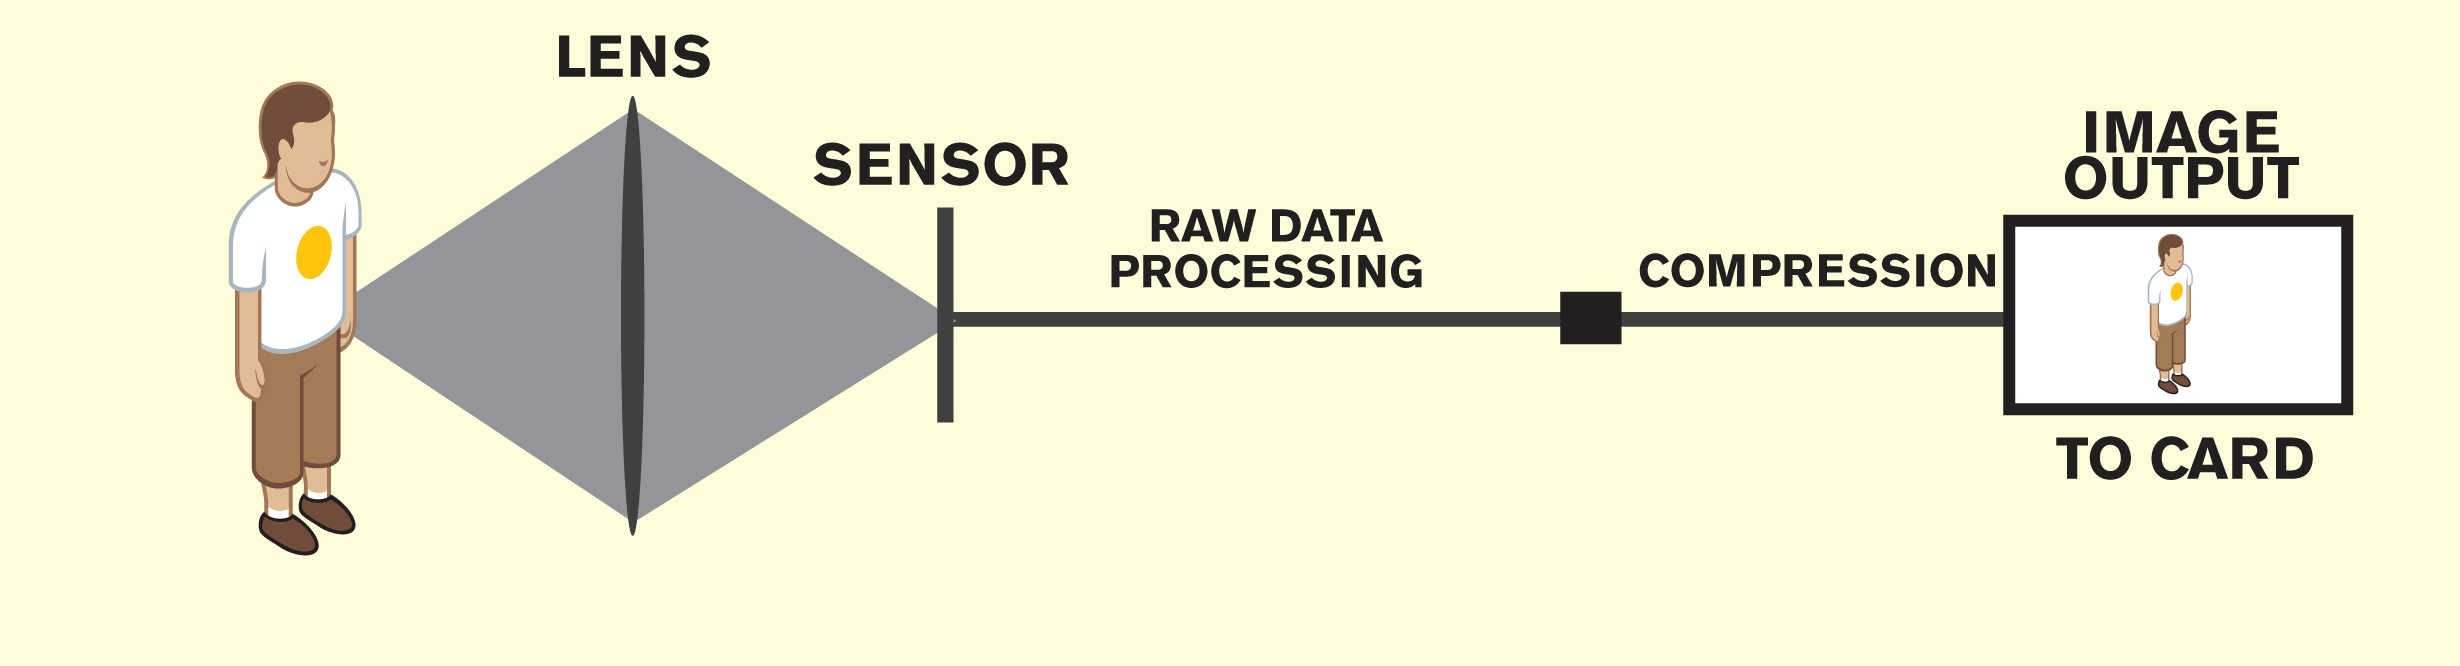 Infographic diagram of a lens' sensor in relation to the raw data and image output.